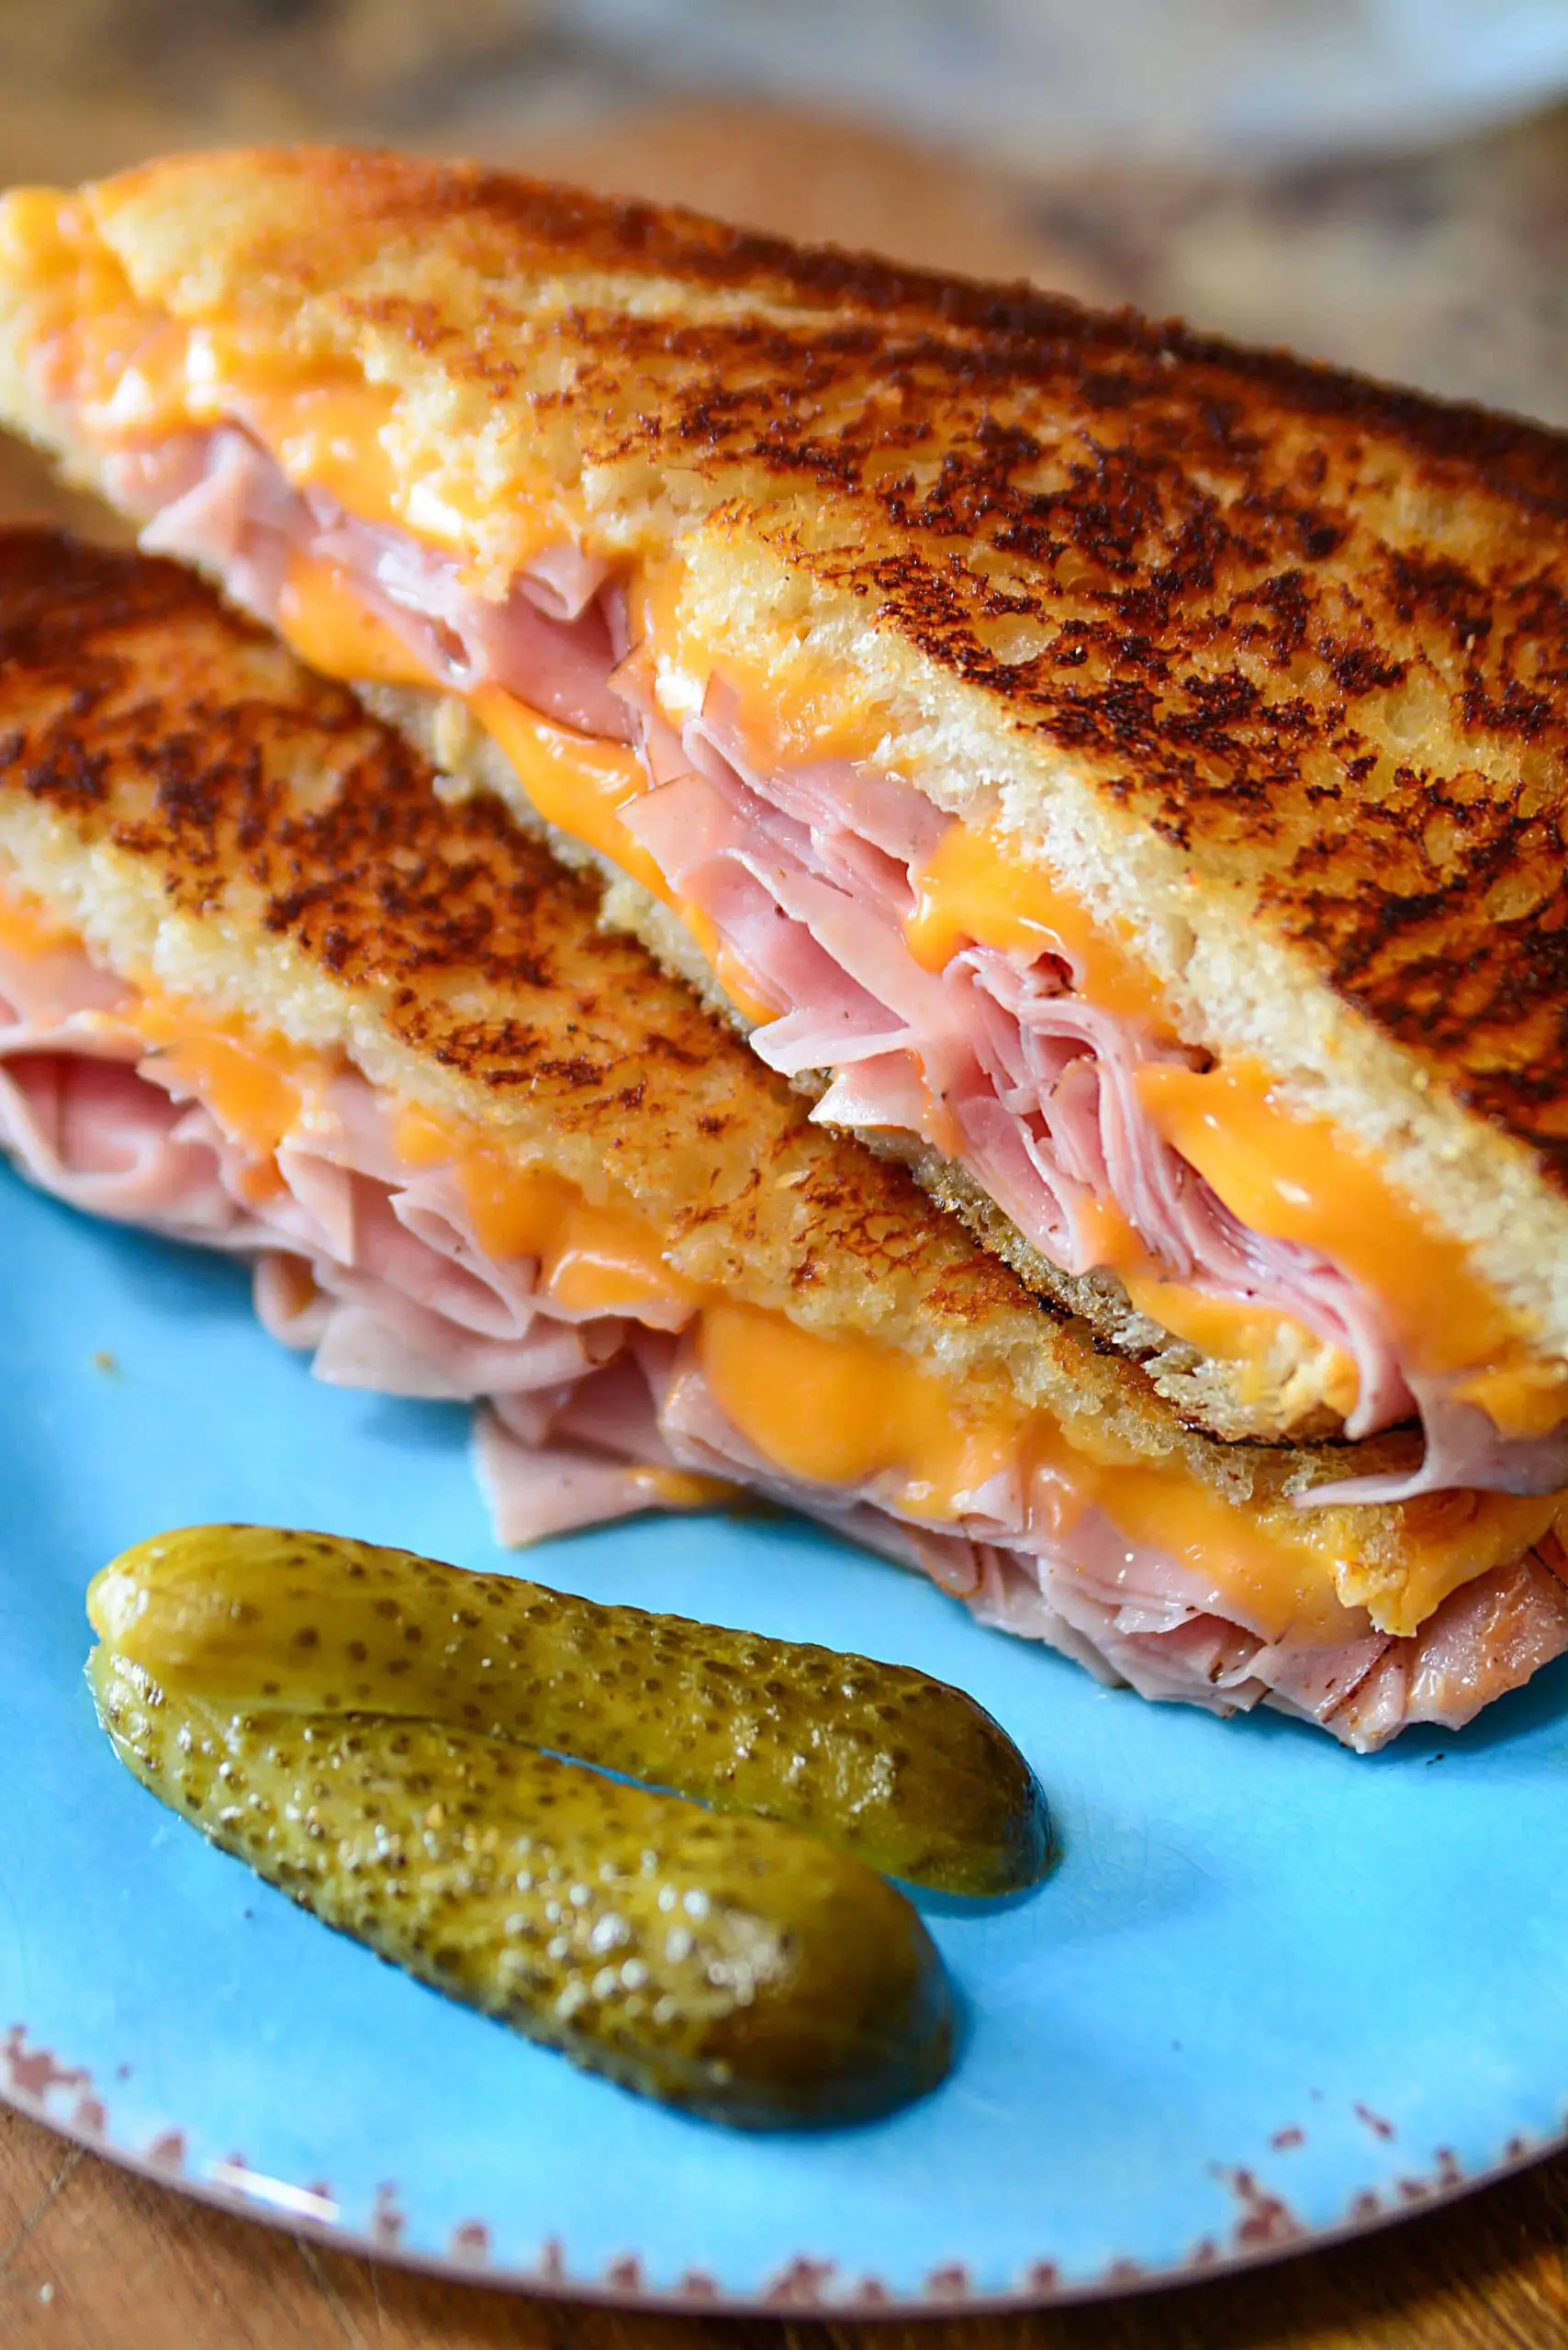 DELICIOUS GRILLED HAM AND CHEESE SANDWICH